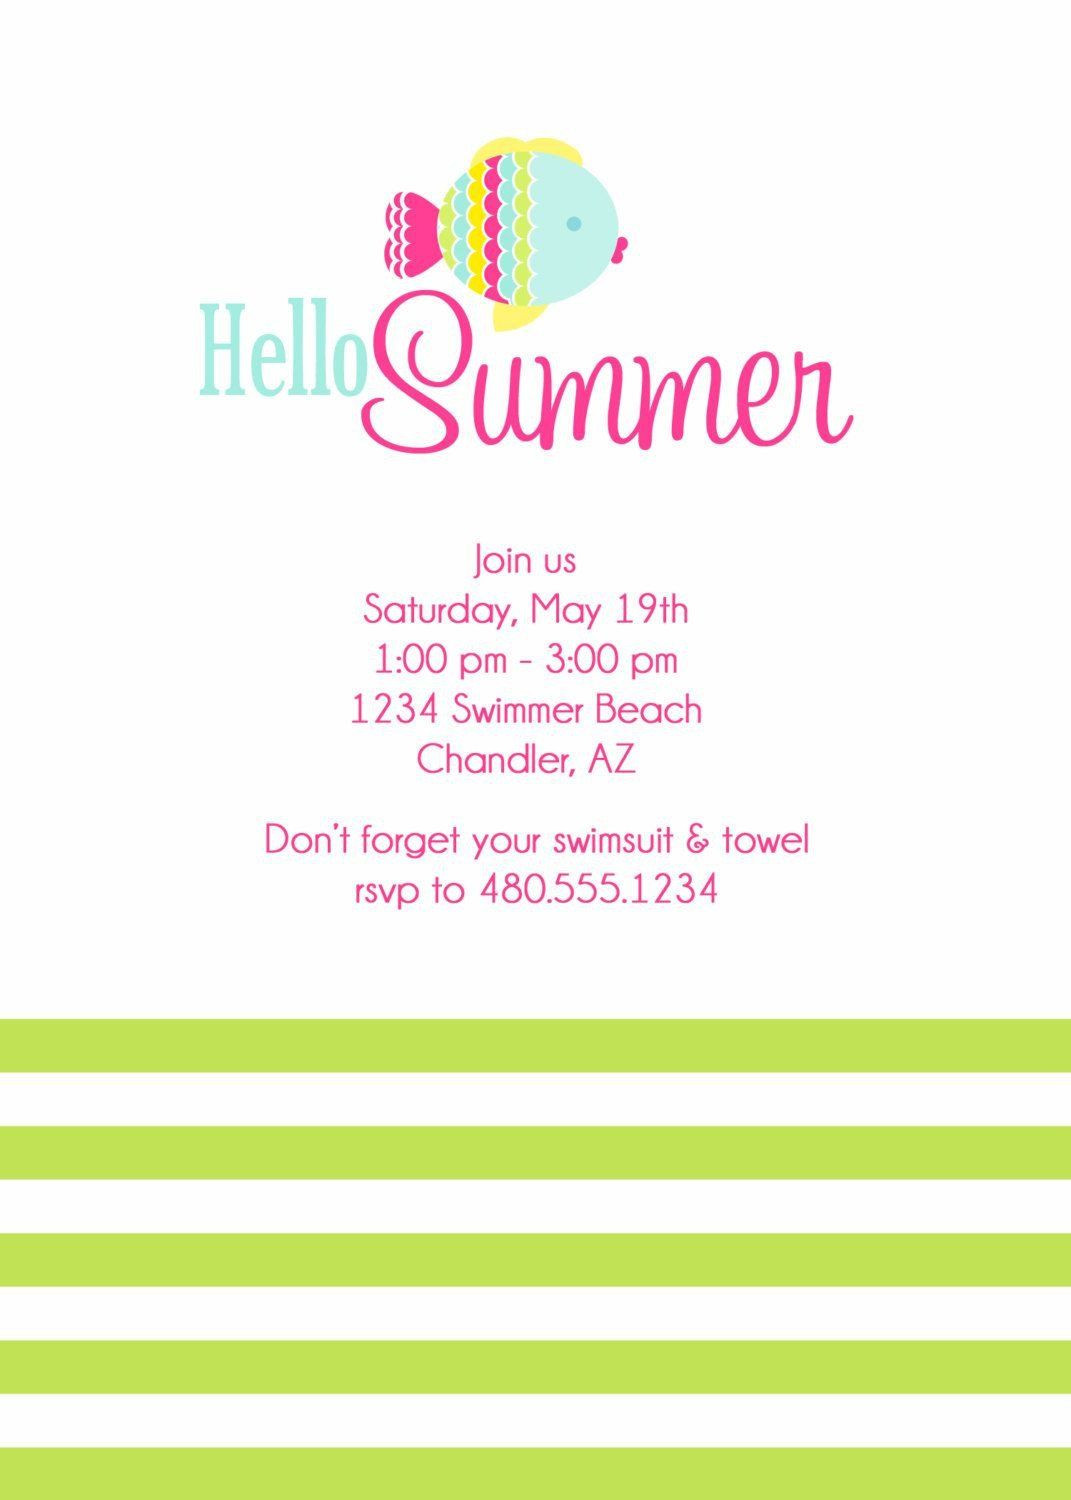 Summer Party Invitation Wording Ideas
 30 Summer Party Invites Templates in 2020